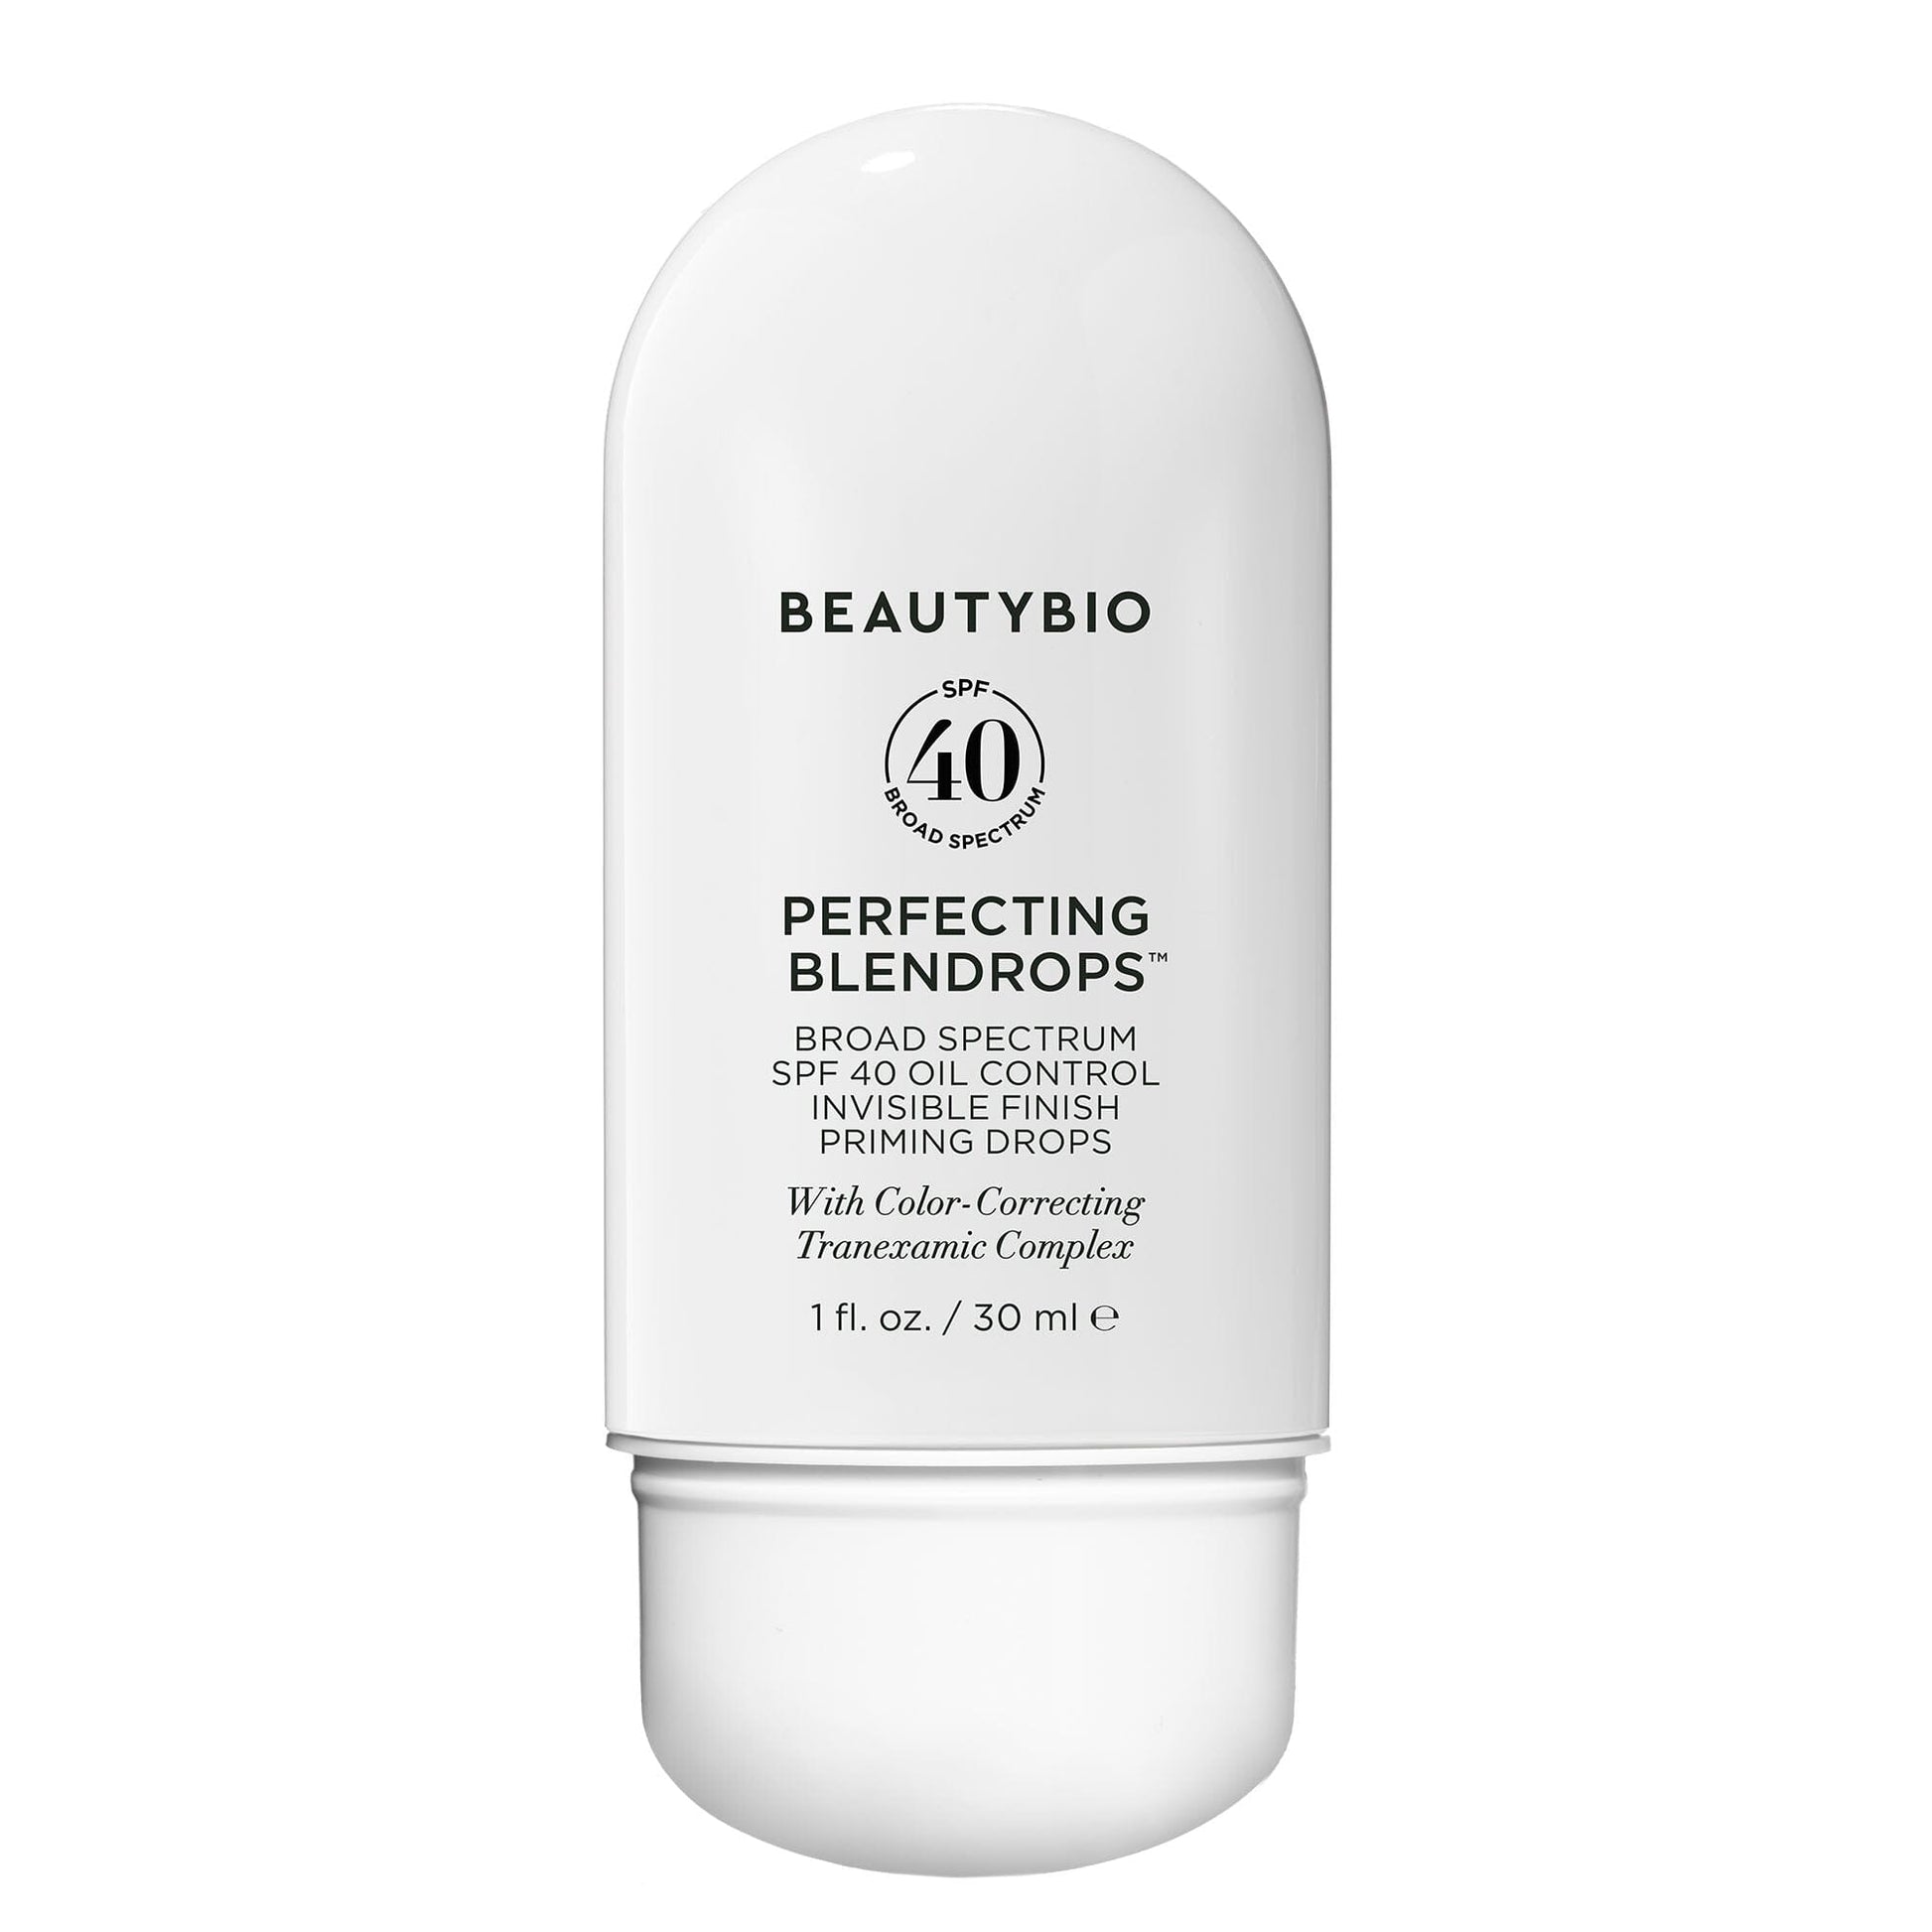 BLENDROPS™ Skincare BeautyBio PERFECTING BLENDROPS™ 